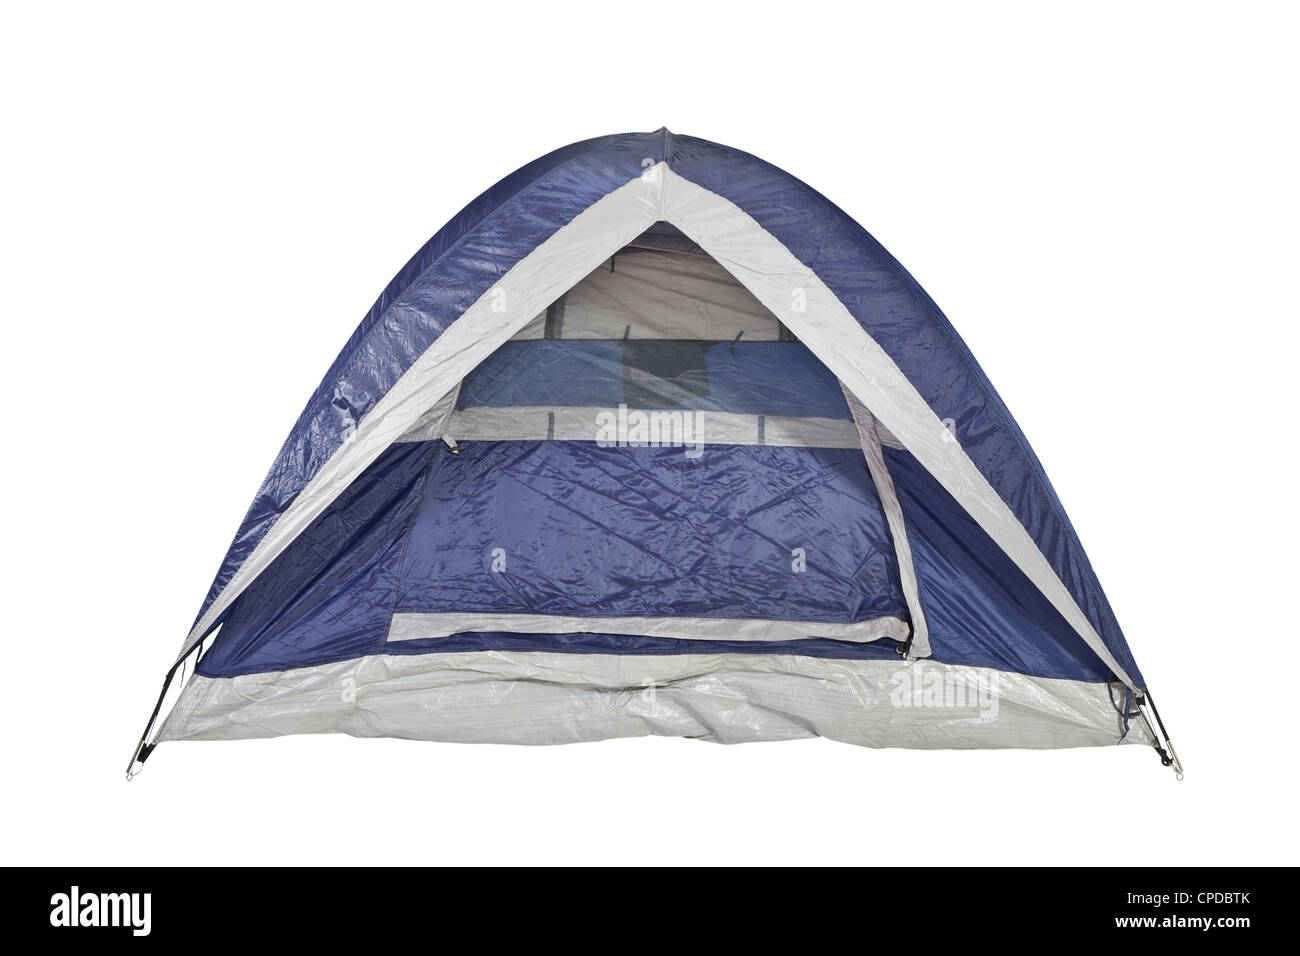 Clean new bright blue tent isolated with clipping path. Stock Photo